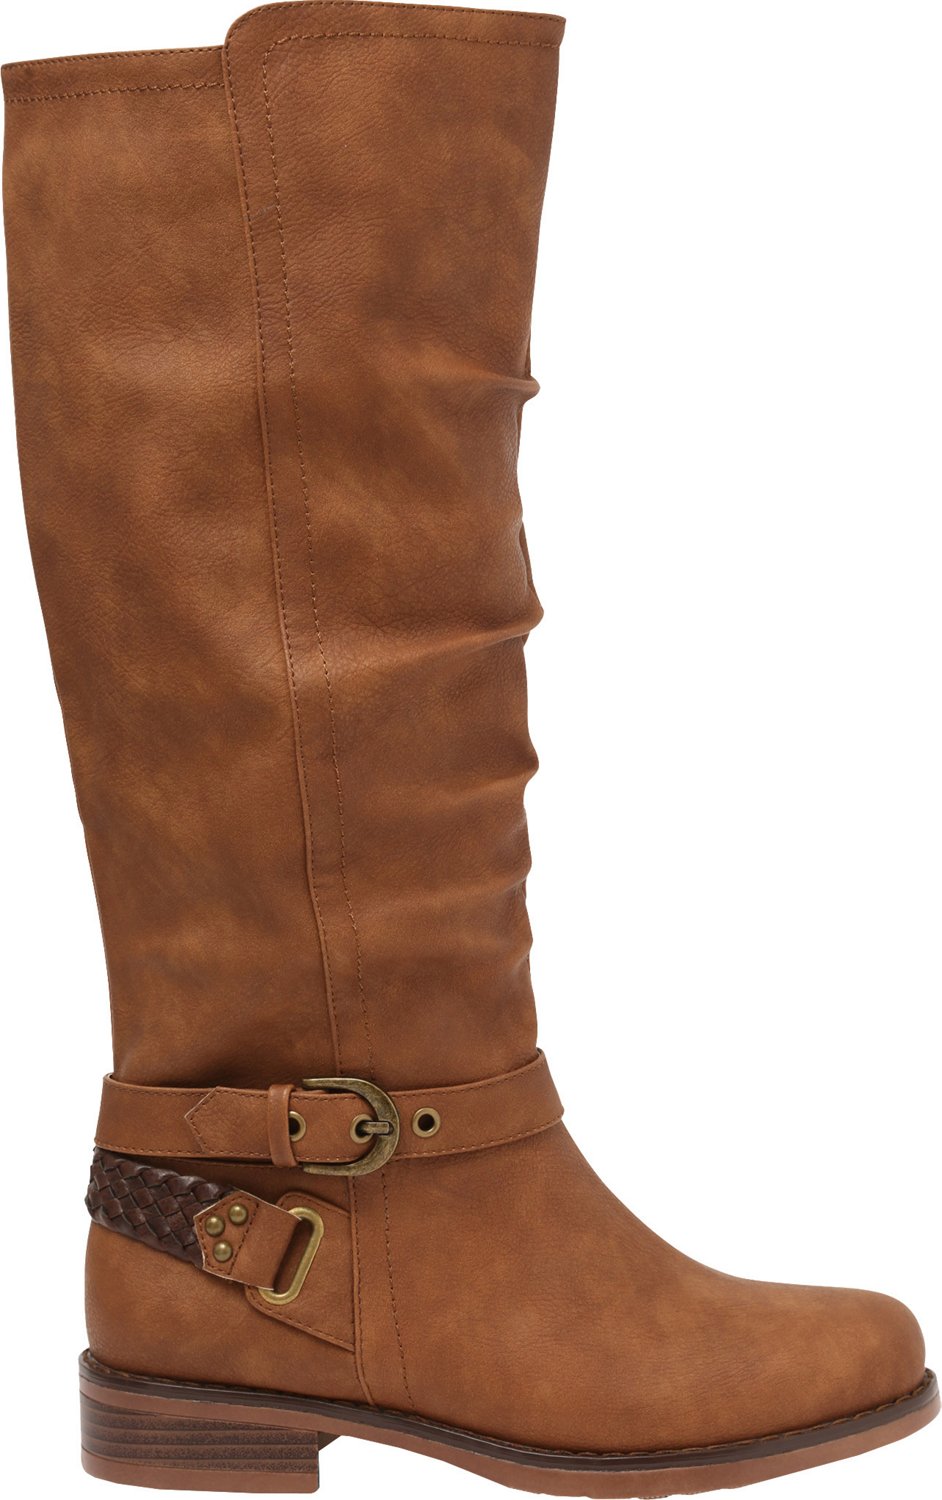 Women's Casual Boots | Casual, Ankle & Tall Boots | Academy